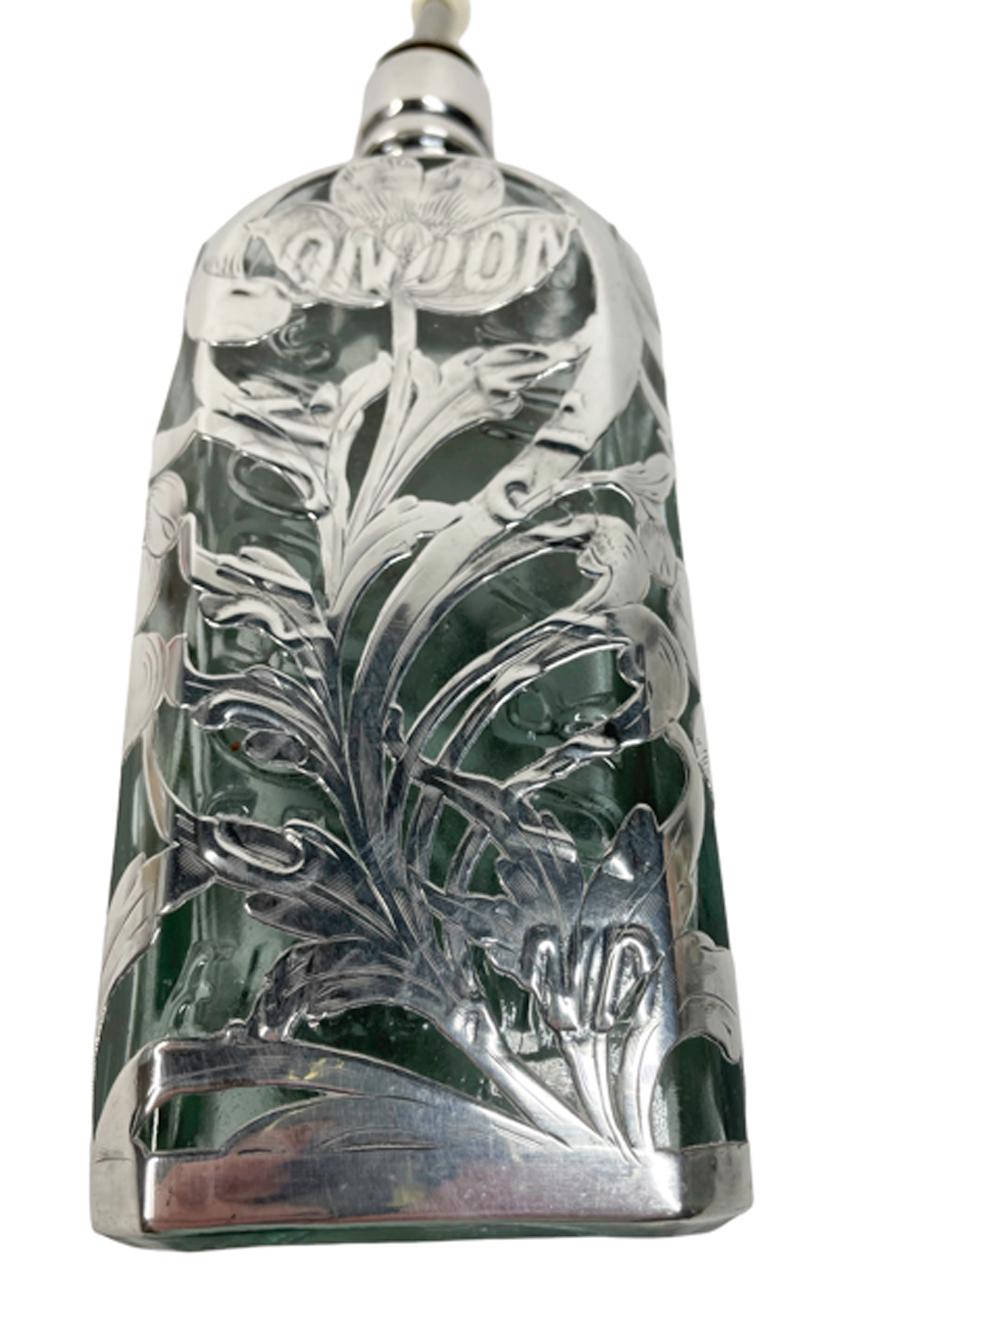 Art Nouveau Late 19th Century Silver Overlay Gordon's Dry Gin Bottle - Sterling Poppies For Sale